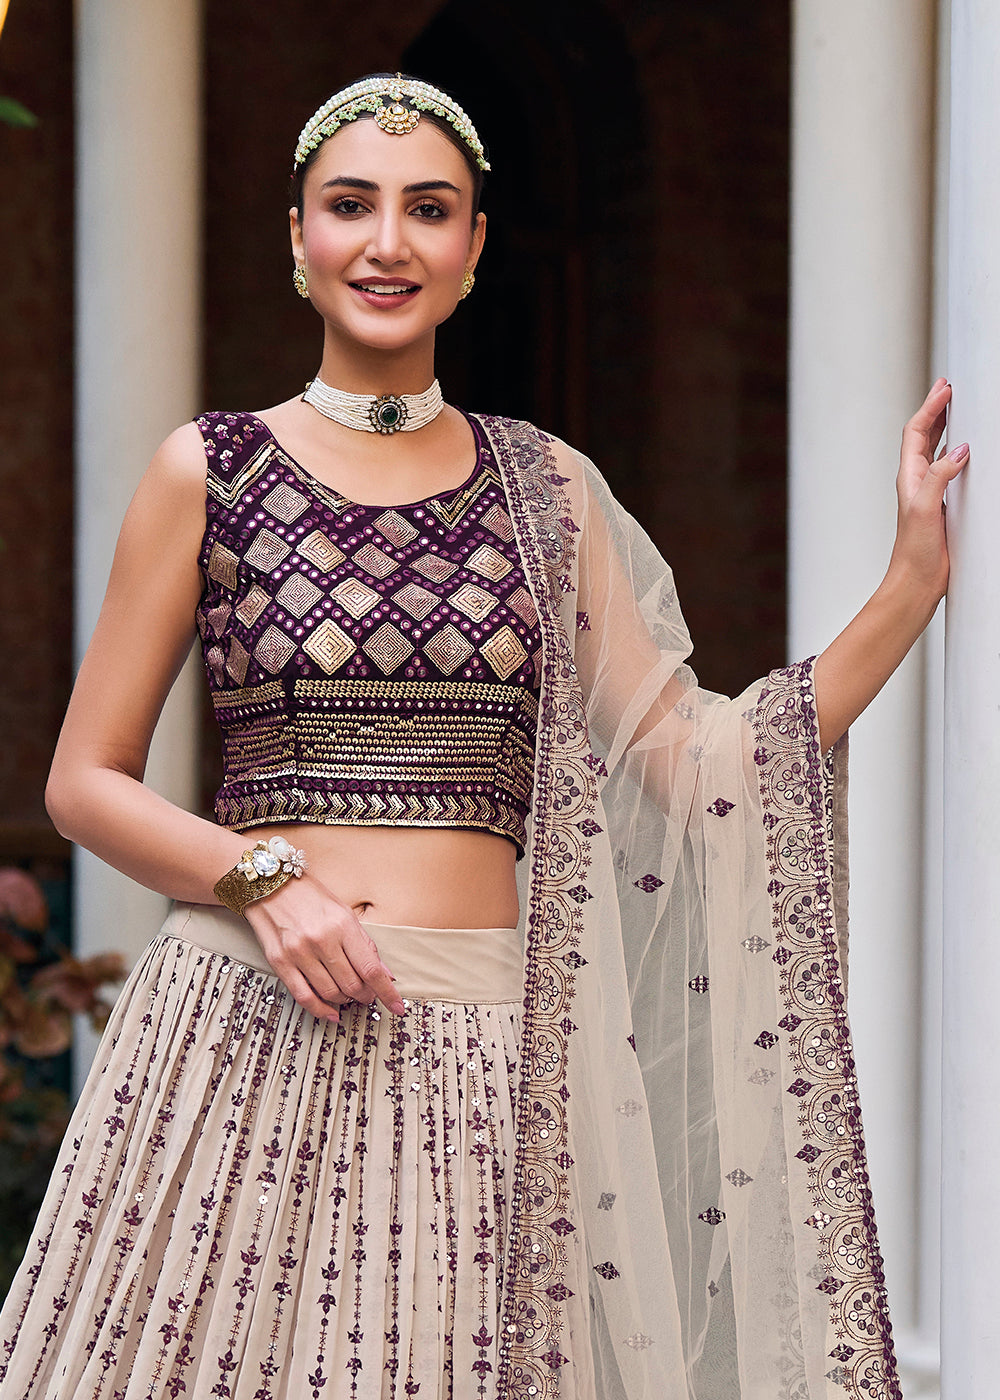 Buy Now Gorgeous Off White & Purple Heavy Embroidery Wedding Party Lehenga Choli Online in USA, UK, Canada & Worldwide at Empress Clothing.